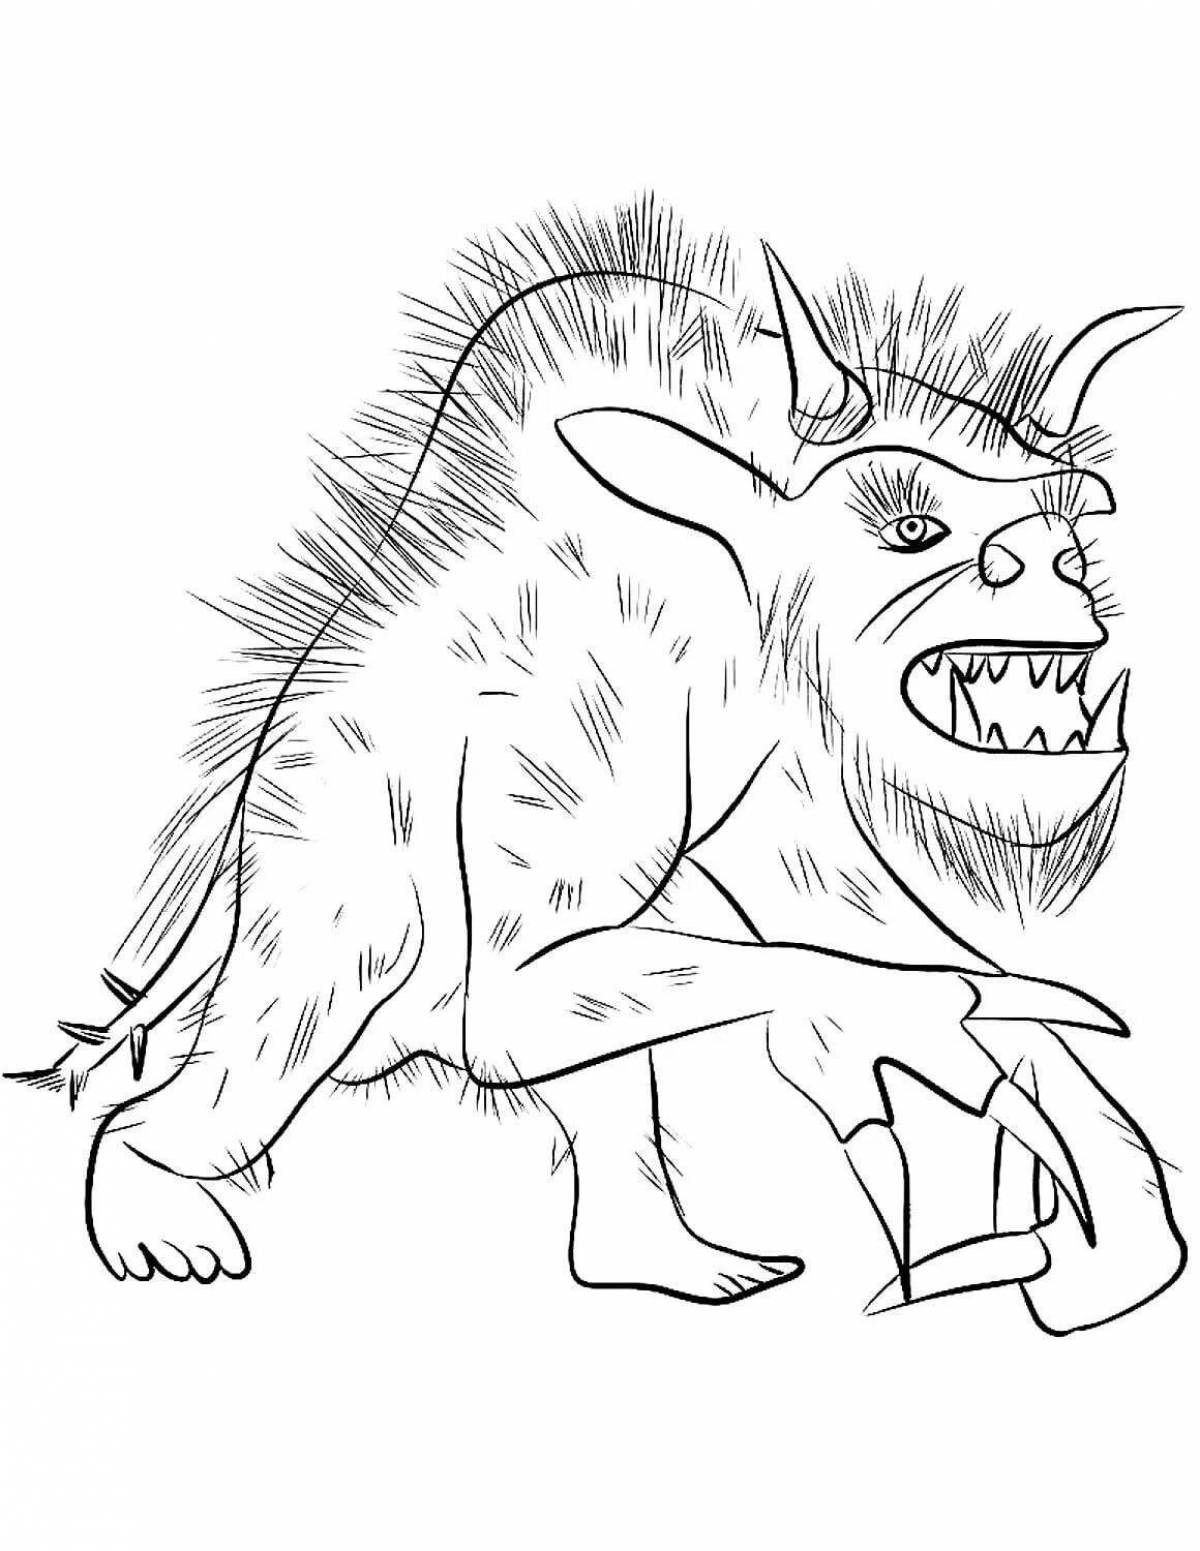 Ghost werewolf coloring book for kids